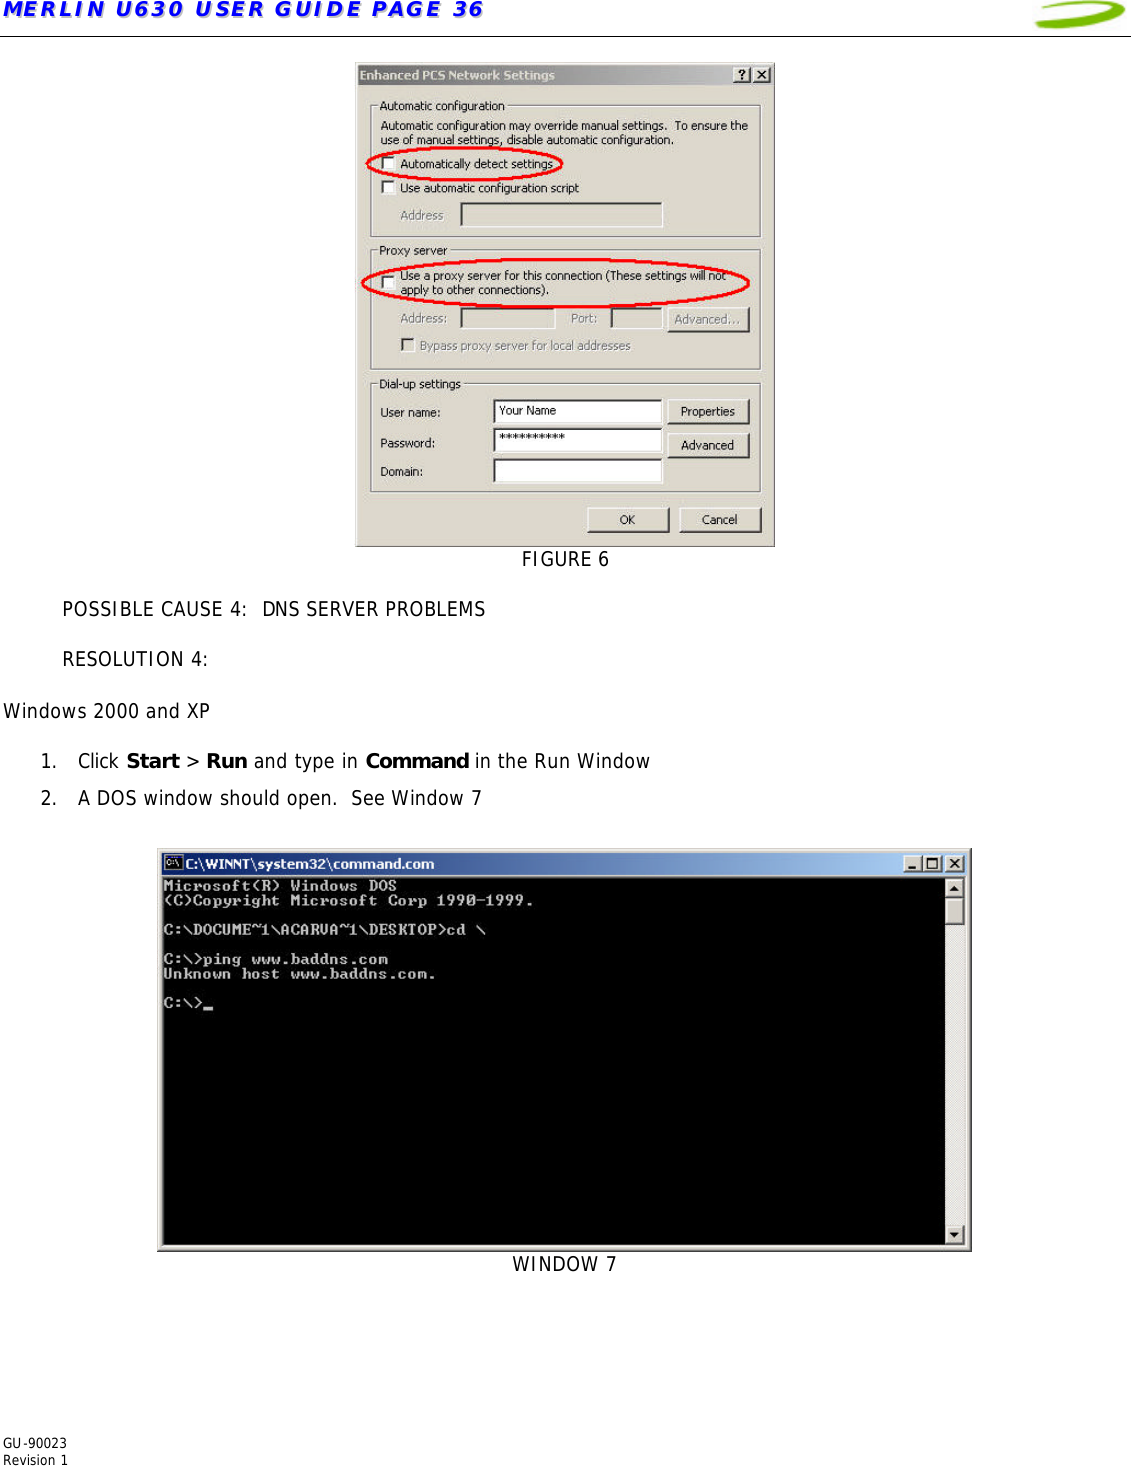 MMEERRLLIINN  UU663300  UUSSEERR  GGUUIIDDEE  PPAAGGEE  3366   GU-90023  Revision 1   FIGURE 6  POSSIBLE CAUSE 4:  DNS SERVER PROBLEMS  RESOLUTION 4:    Windows 2000 and XP  1. Click Start &gt; Run and type in Command in the Run Window 2. A DOS window should open.  See Window 7    WINDOW 7  